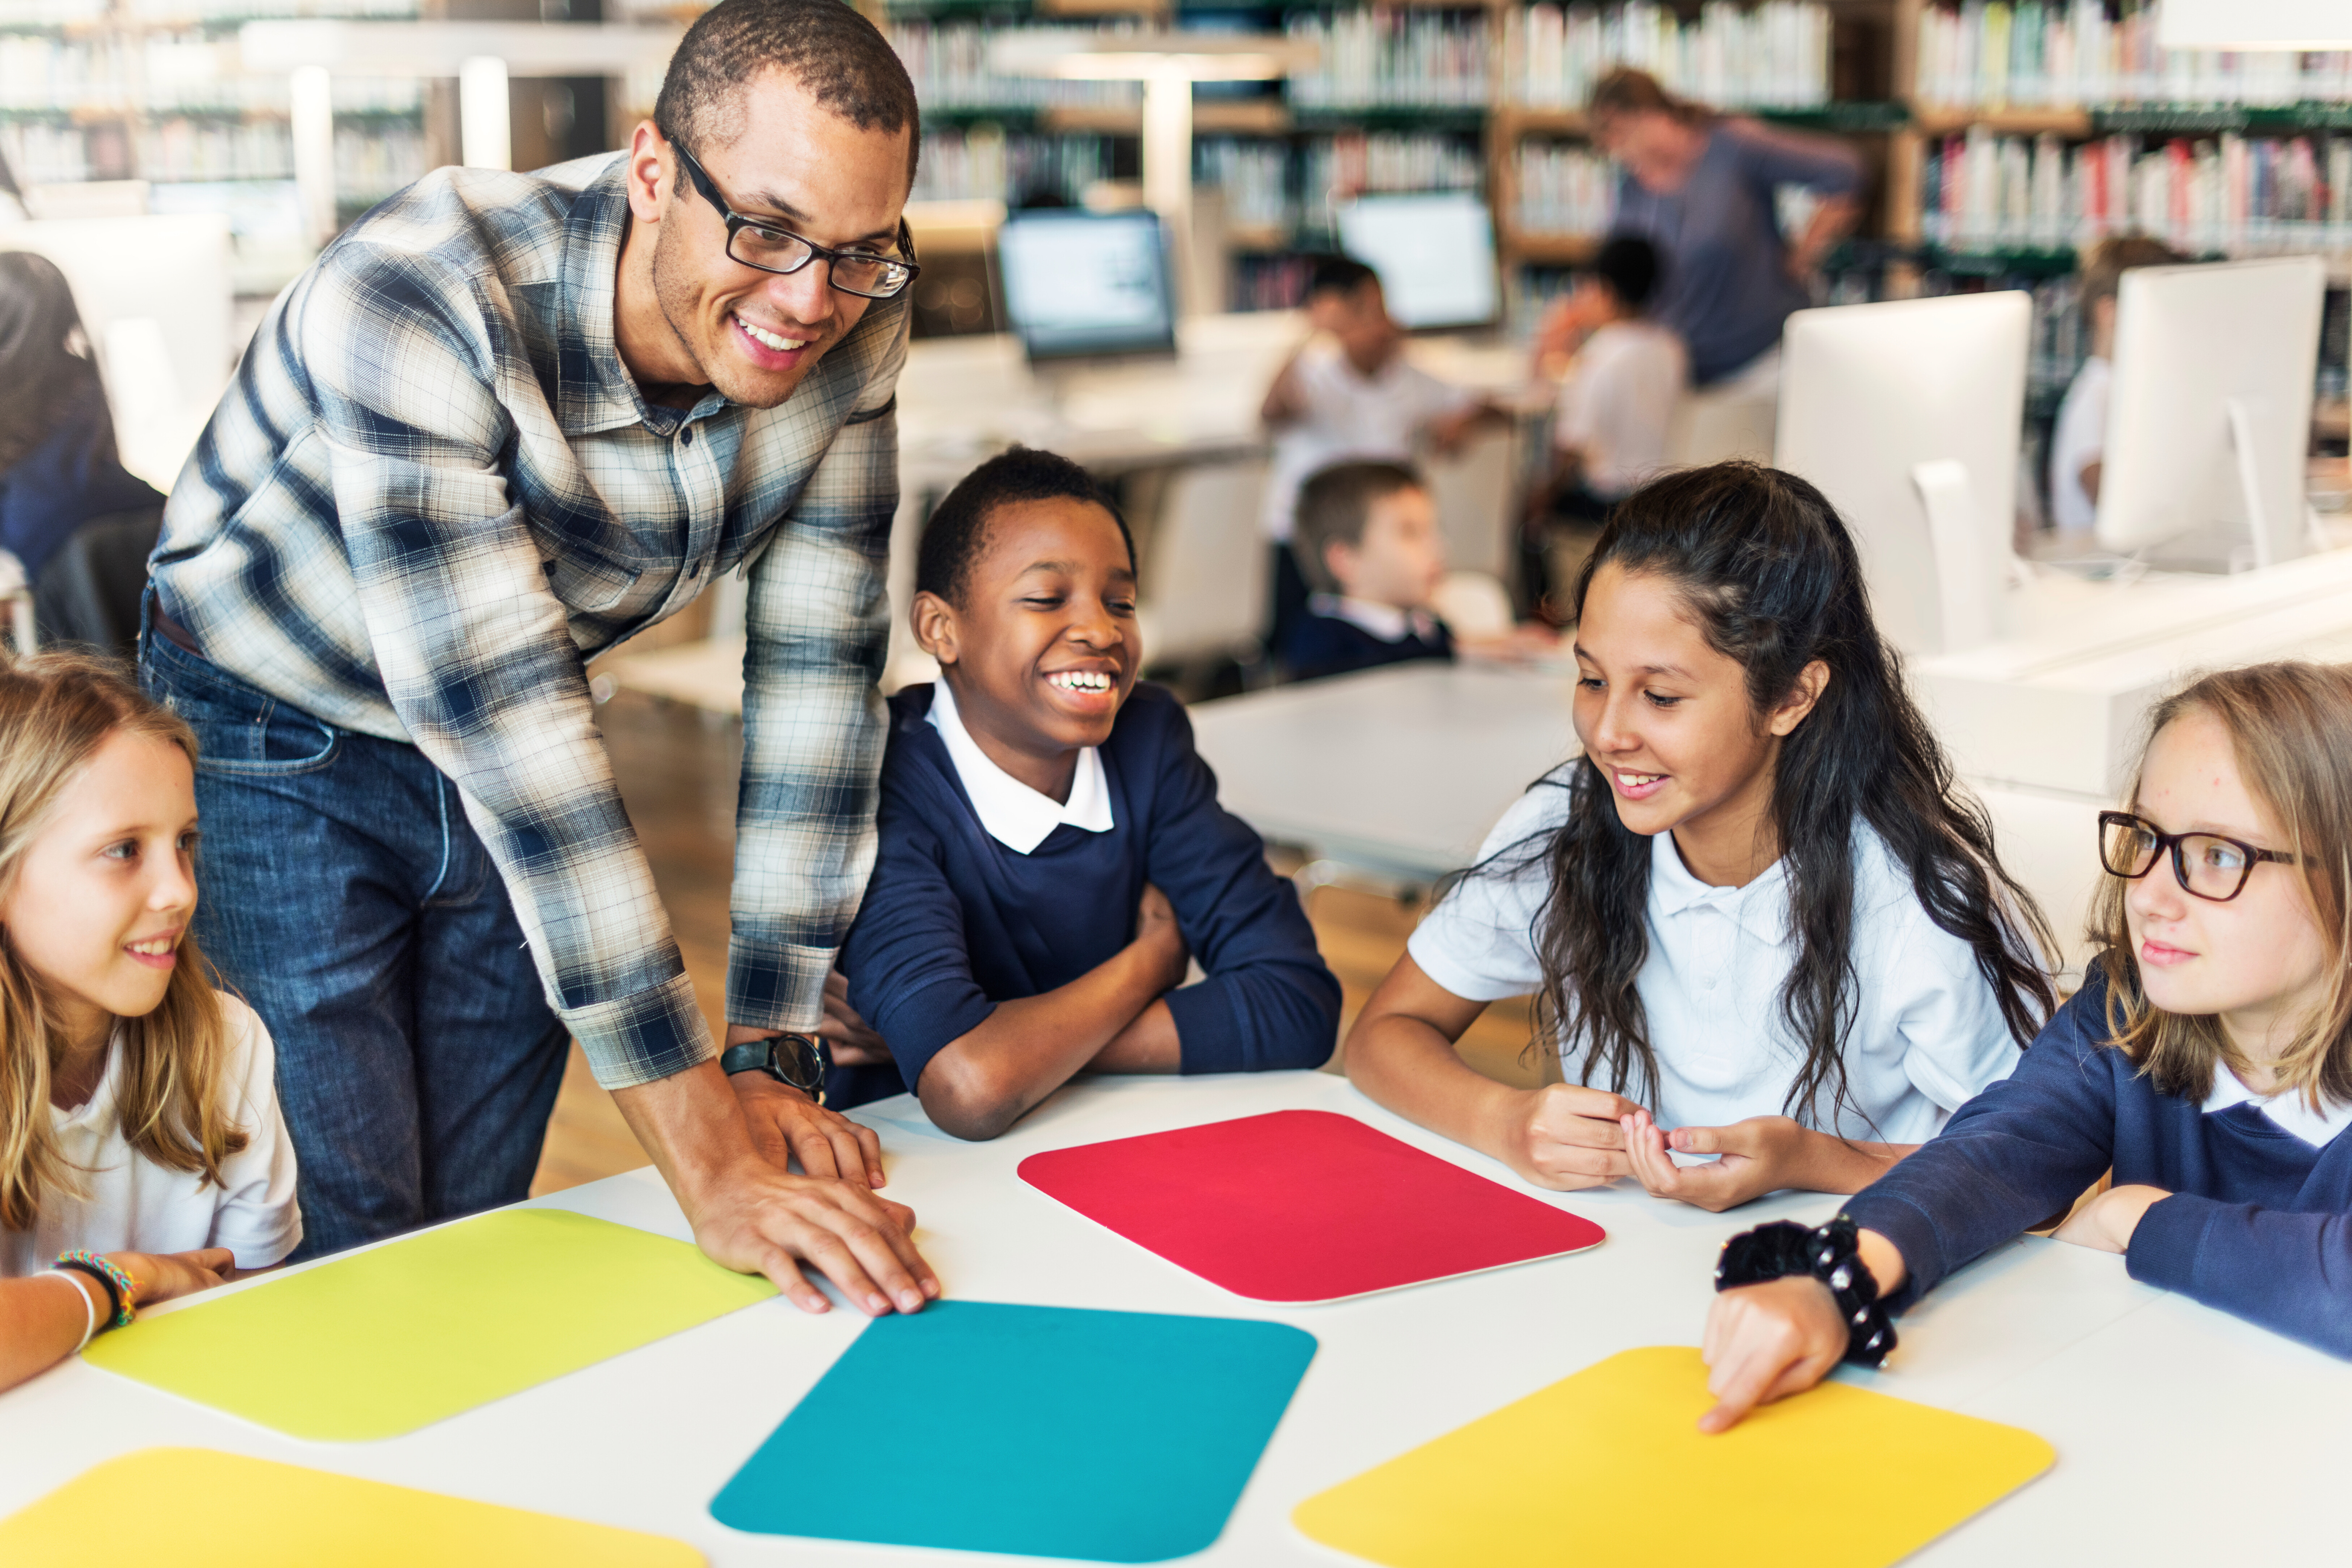 K-12 ERP Solutions can help streamline processes to free up time for what's important - Helping your students! Pictured is an adult male teacher working with a group of smiling kids with coloured duotangs.